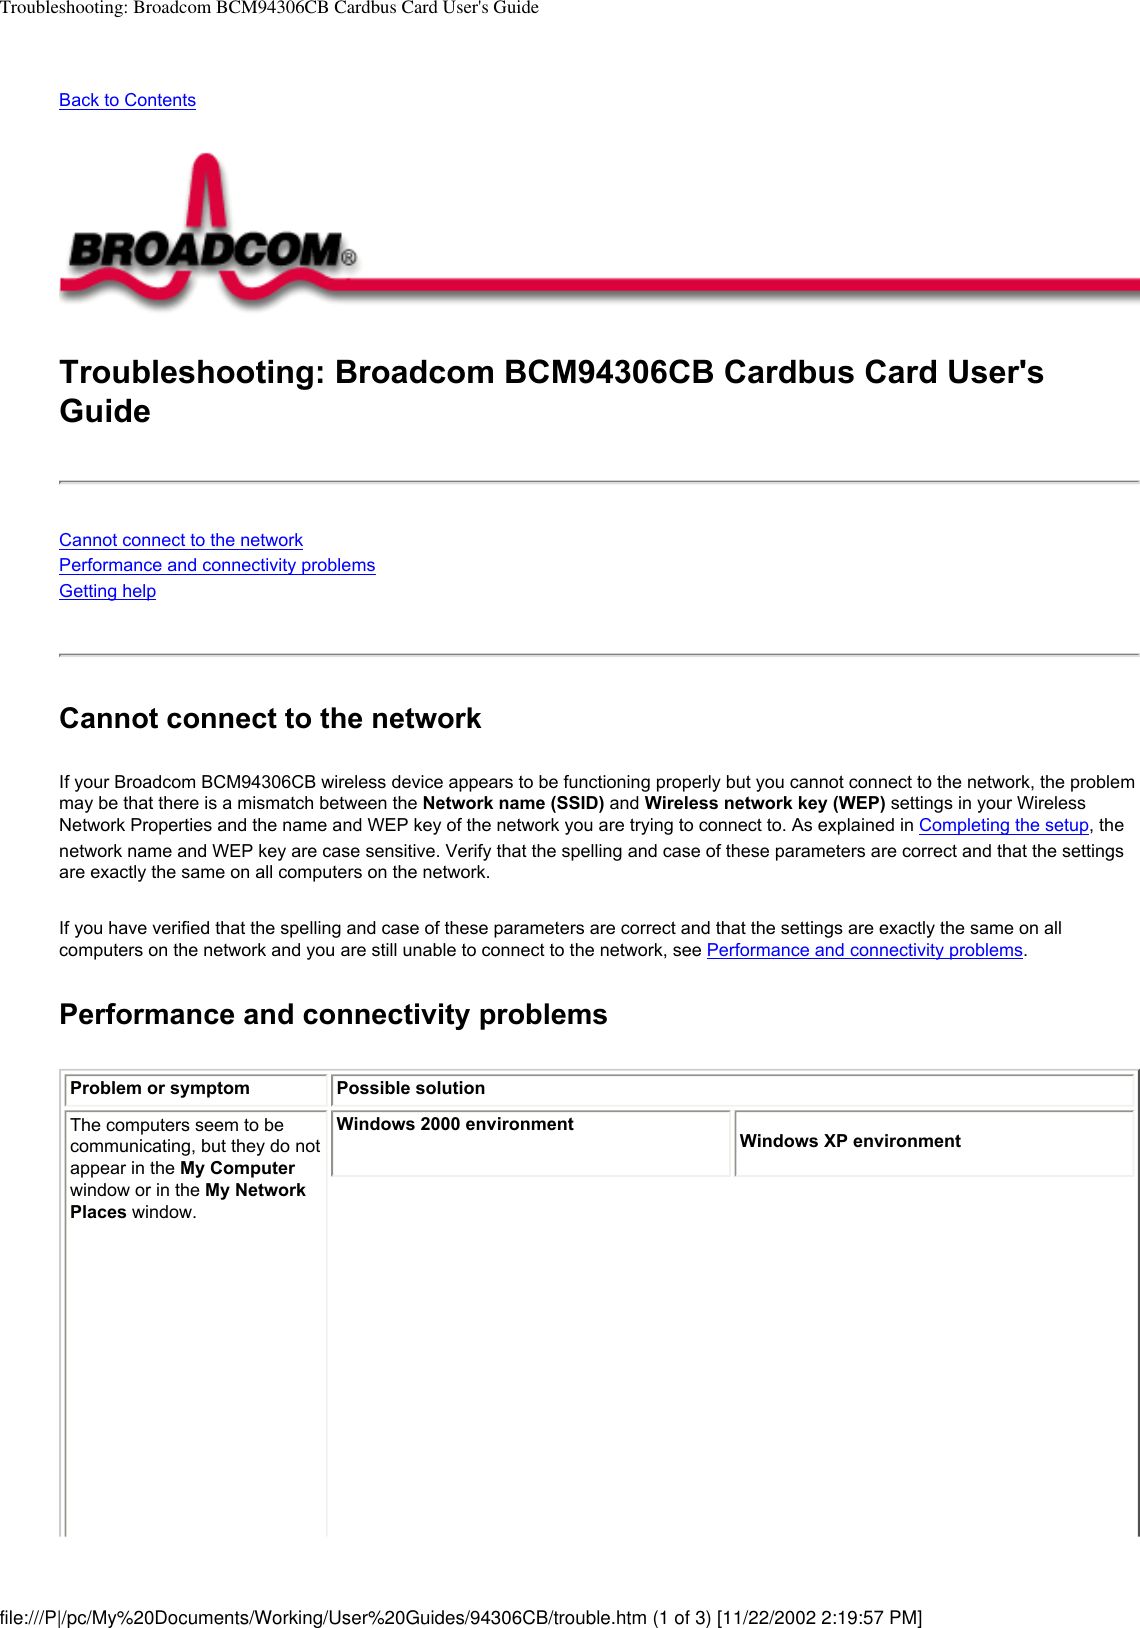 Troubleshooting: Broadcom BCM94306CB Cardbus Card User&apos;s GuideBack to Contents Troubleshooting: Broadcom BCM94306CB Cardbus Card User&apos;s GuideCannot connect to the networkPerformance and connectivity problemsGetting helpCannot connect to the networkIf your Broadcom BCM94306CB wireless device appears to be functioning properly but you cannot connect to the network, the problem may be that there is a mismatch between the Network name (SSID) and Wireless network key (WEP) settings in your Wireless Network Properties and the name and WEP key of the network you are trying to connect to. As explained in Completing the setup, the network name and WEP key are case sensitive. Verify that the spelling and case of these parameters are correct and that the settings are exactly the same on all computers on the network.If you have verified that the spelling and case of these parameters are correct and that the settings are exactly the same on all computers on the network and you are still unable to connect to the network, see Performance and connectivity problems. Performance and connectivity problemsProblem or symptom Possible solutionThe computers seem to be communicating, but they do not appear in the My Computer window or in the My Network Places window.Windows 2000 environmentWindows XP environmentfile:///P|/pc/My%20Documents/Working/User%20Guides/94306CB/trouble.htm (1 of 3) [11/22/2002 2:19:57 PM]